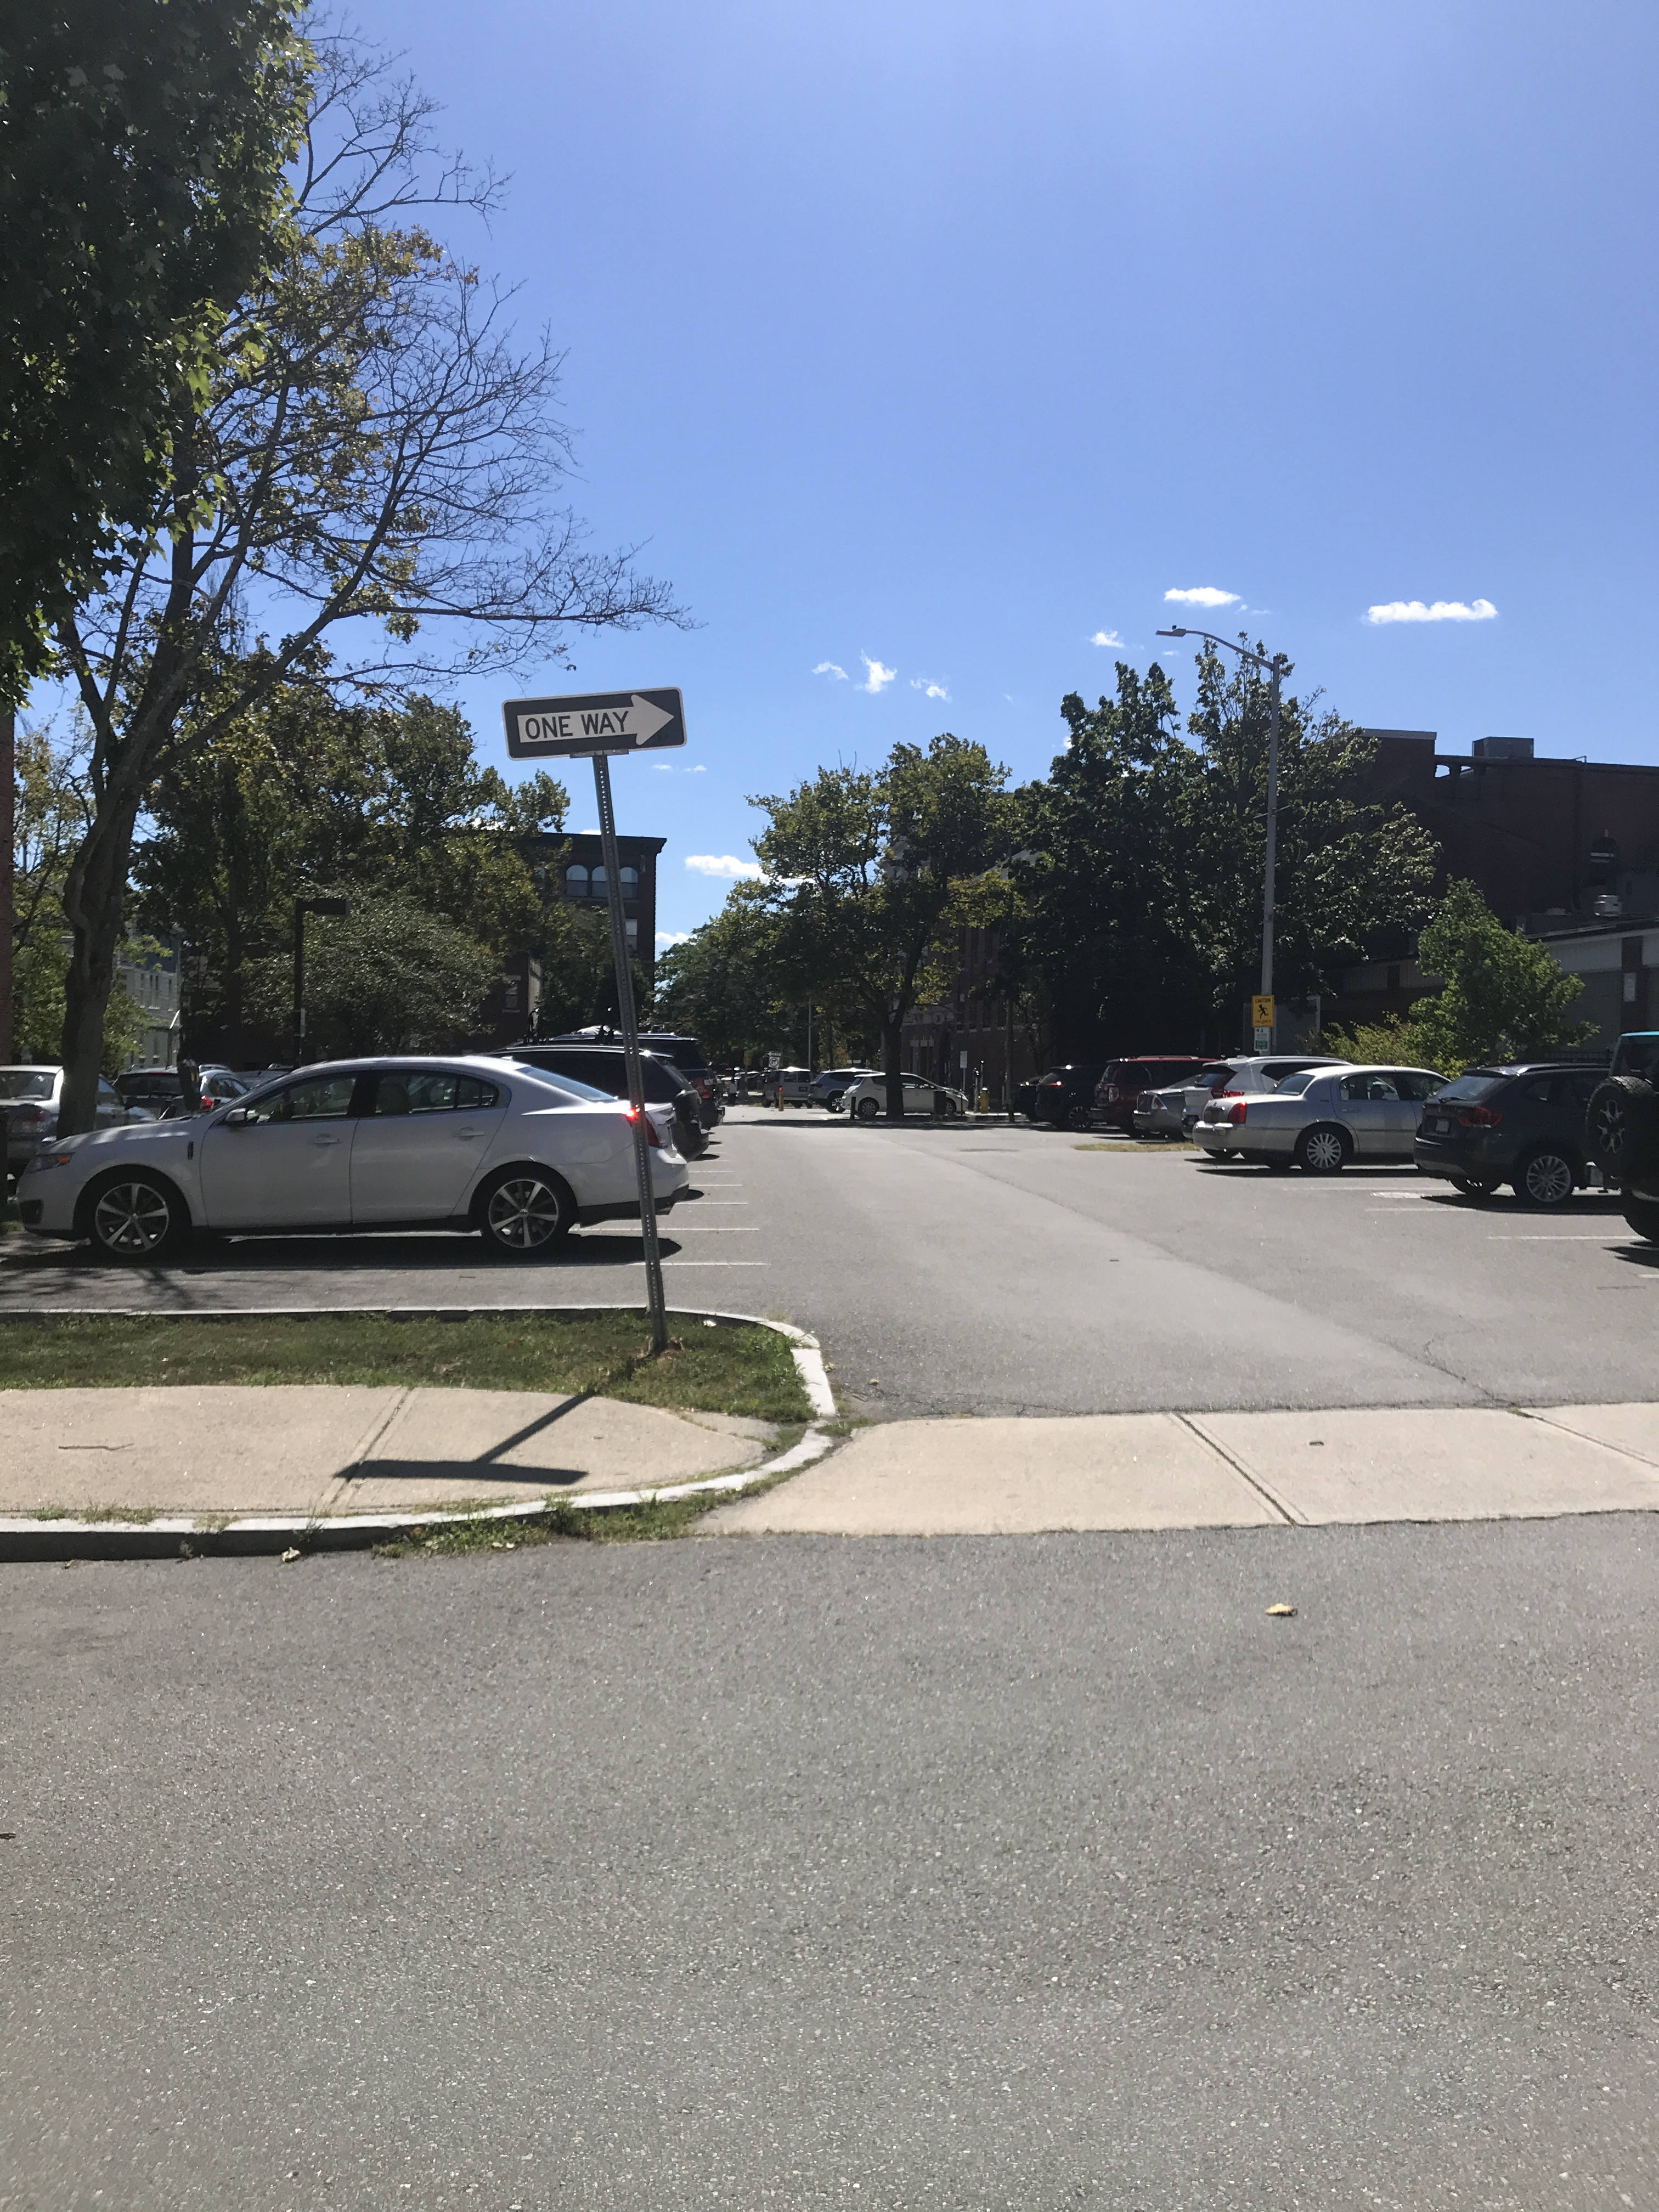 A view from one side of a street, across the street, where a parking lot also serves as a cross-street to the next street over